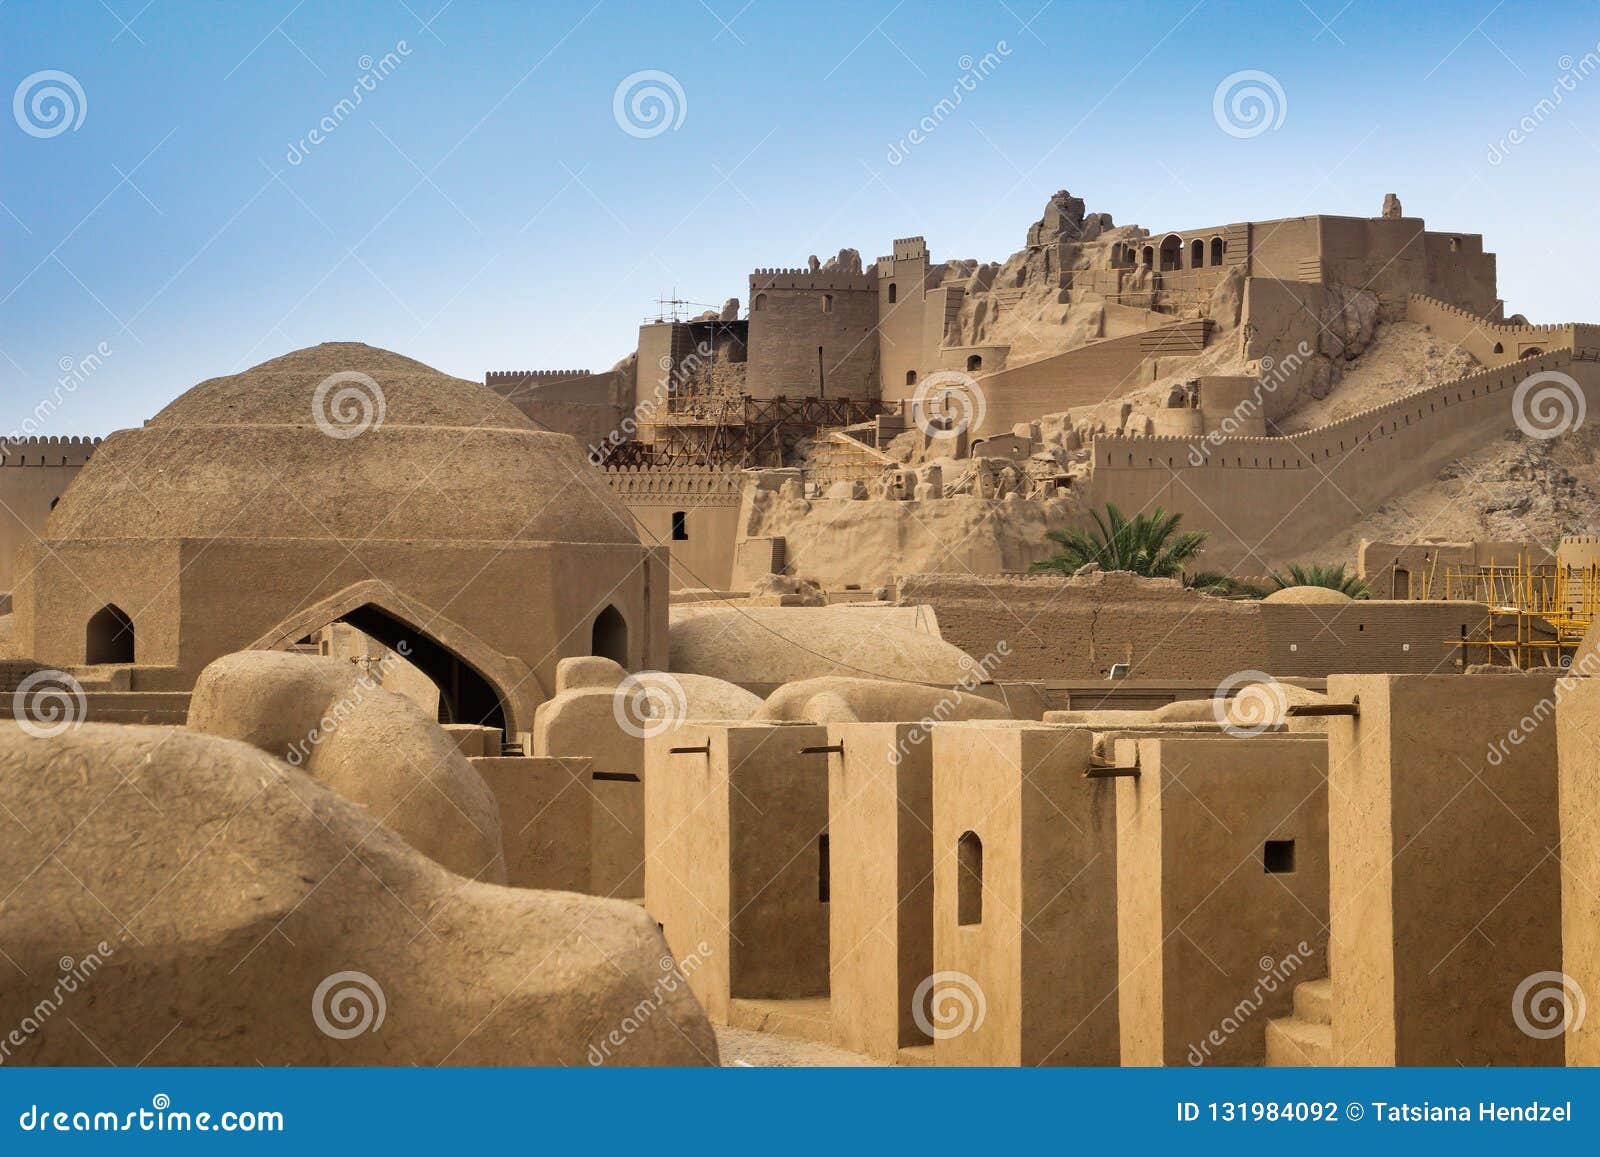 the ancient city of bam in the south of iran